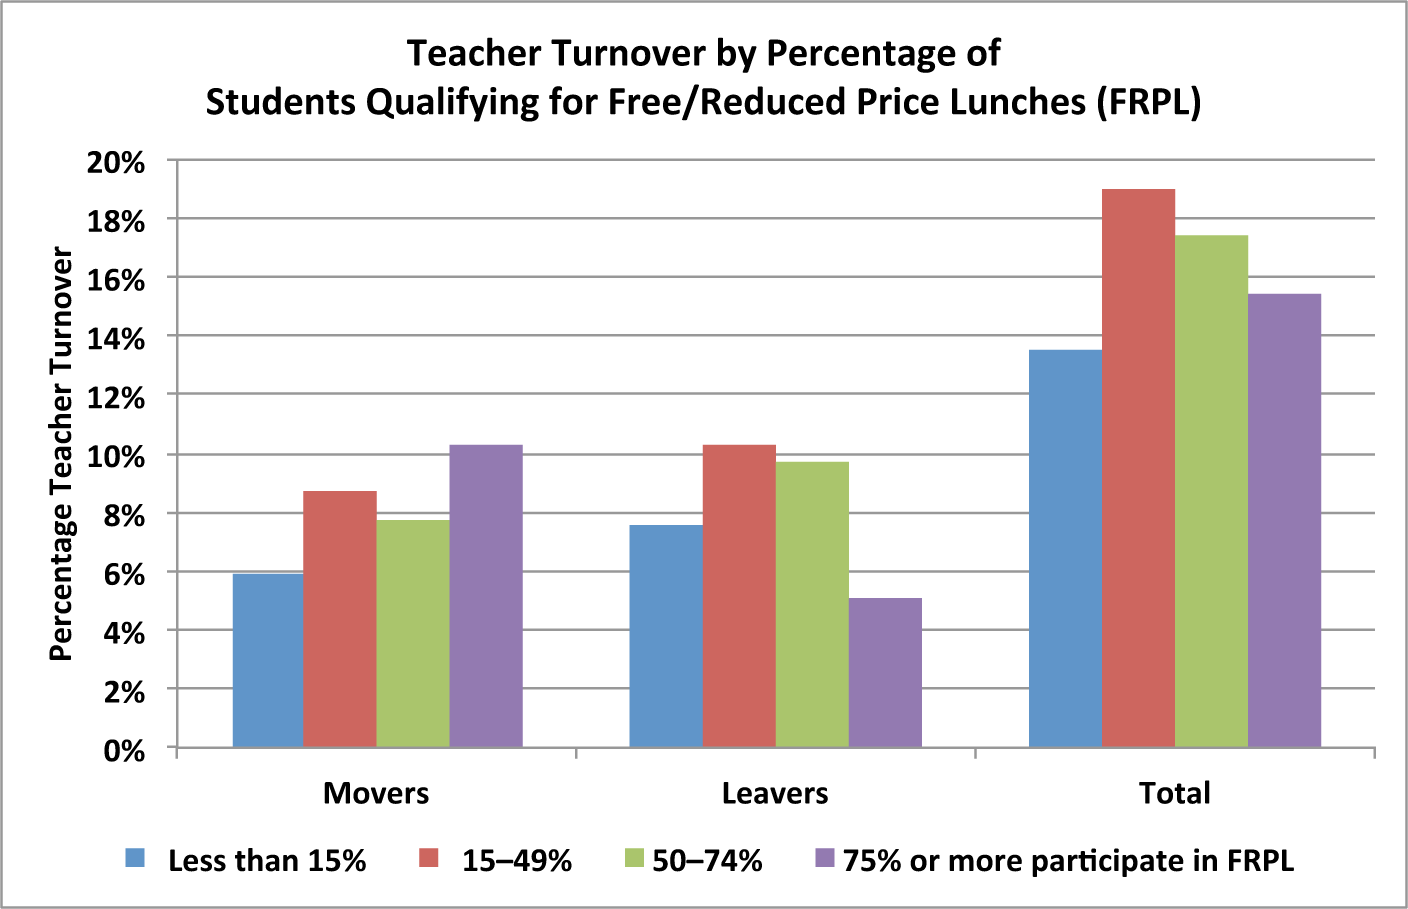 How Do Teacher Turnover Rates Differ Among Schools With Different Socio